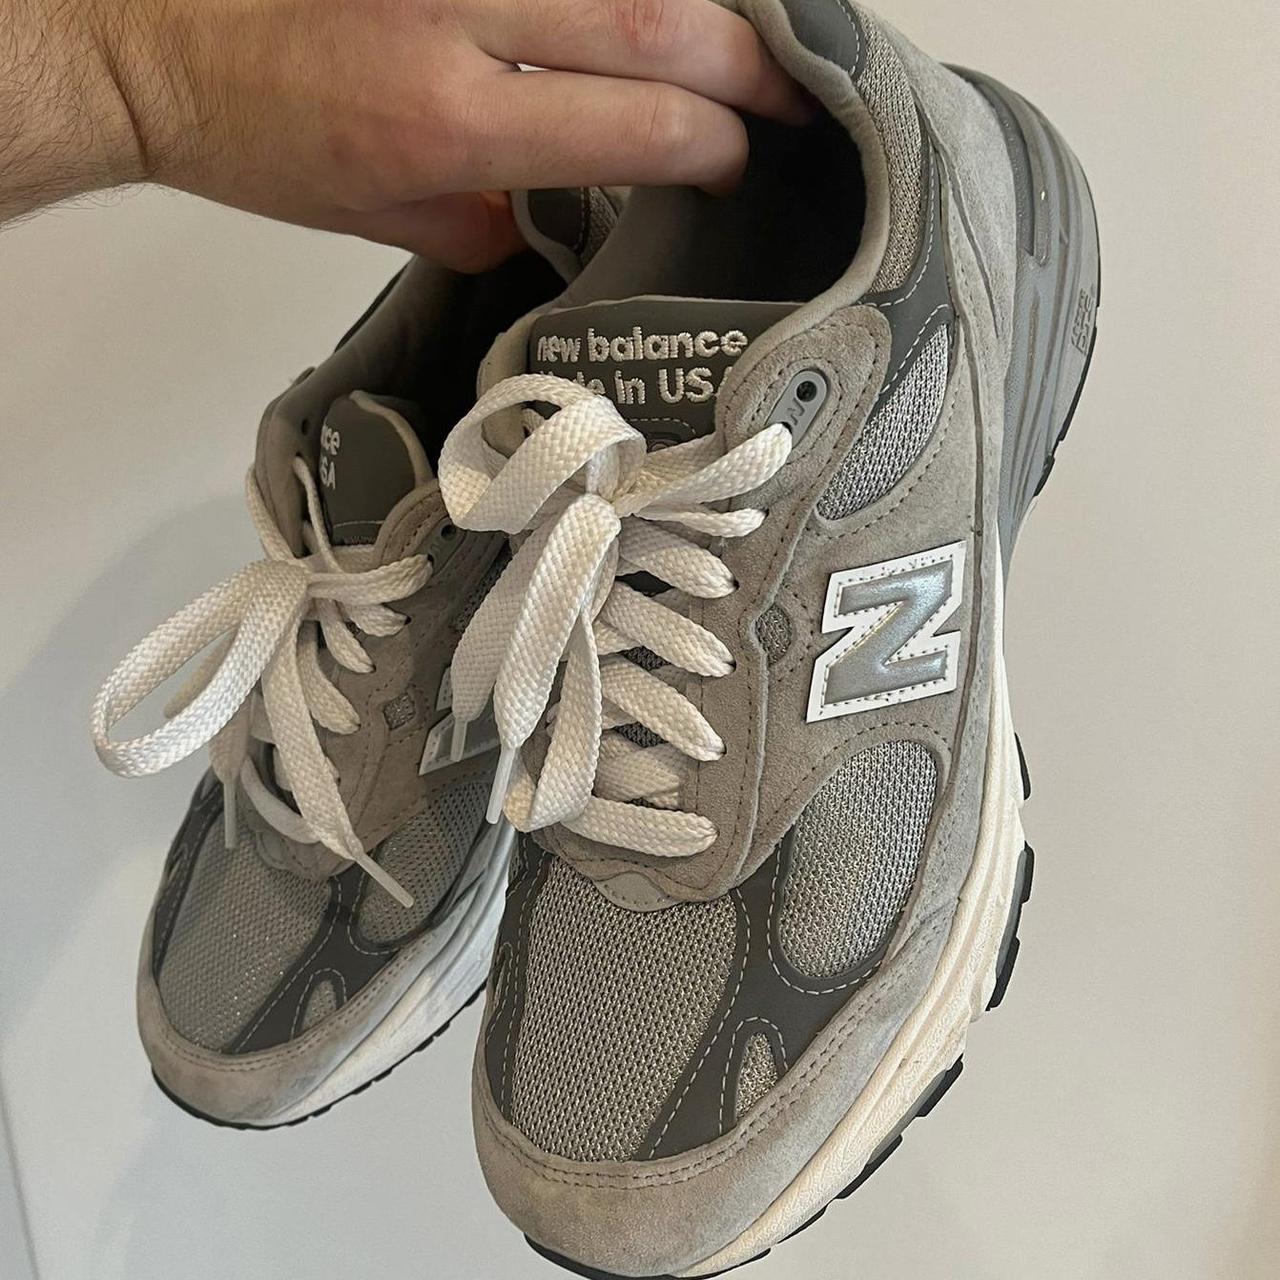 Iconic New Balance 993 Excellent condition, rarely... - Depop